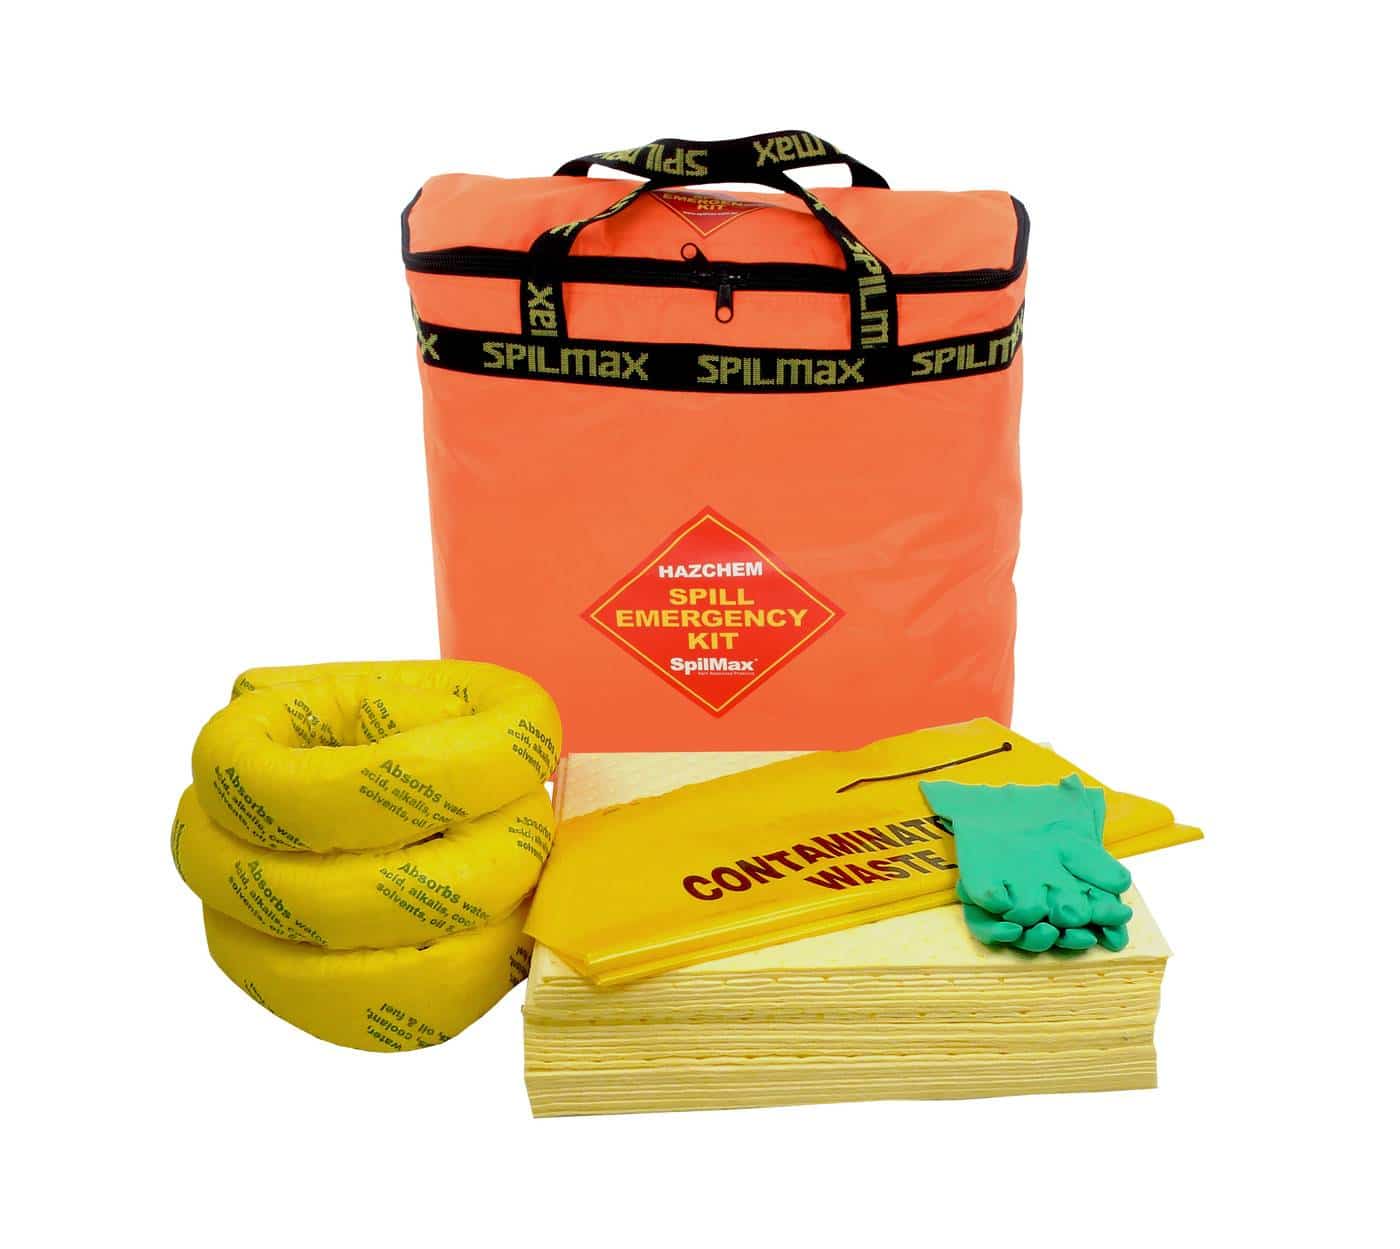 SpilMax 50L Chemical Vehicle Spill Kit Bag with contents showing